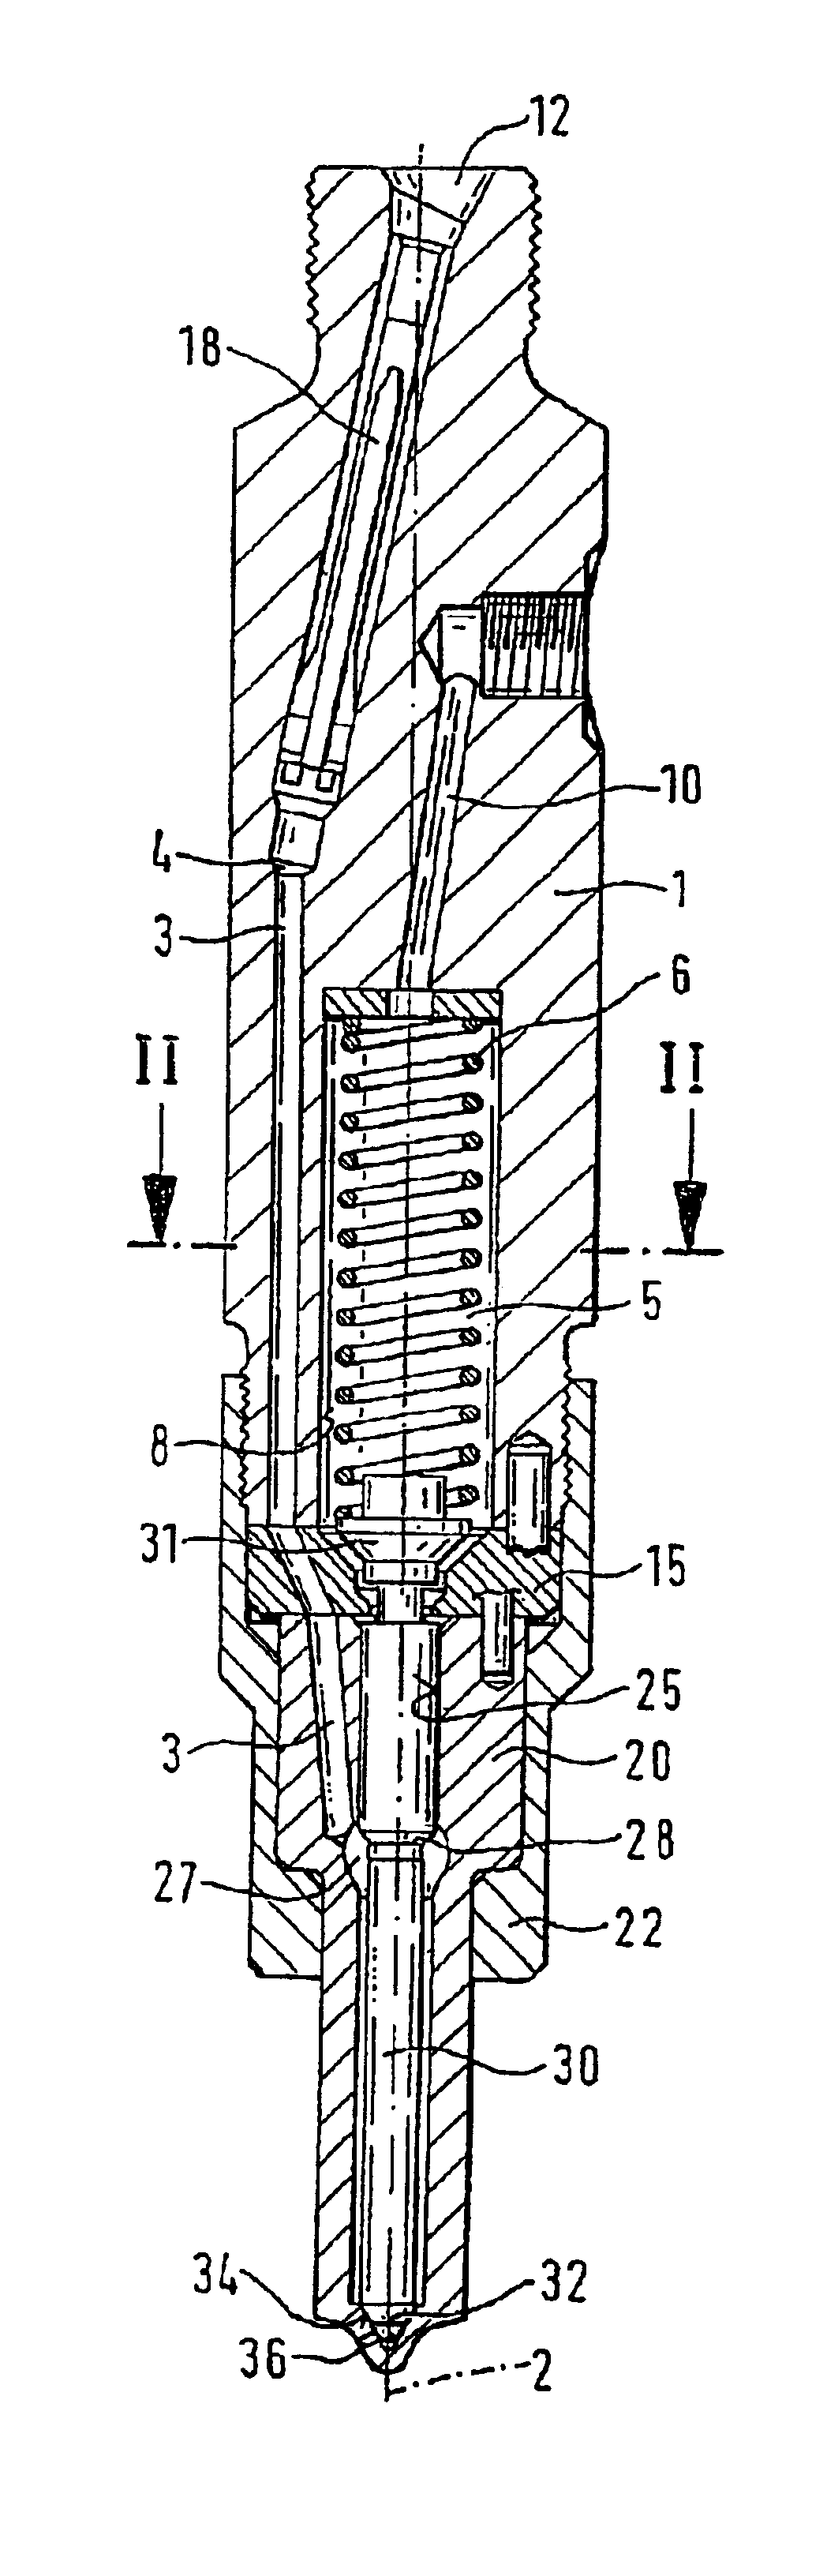 Fuel injection valve for internal combustion engines, and a method for producing same